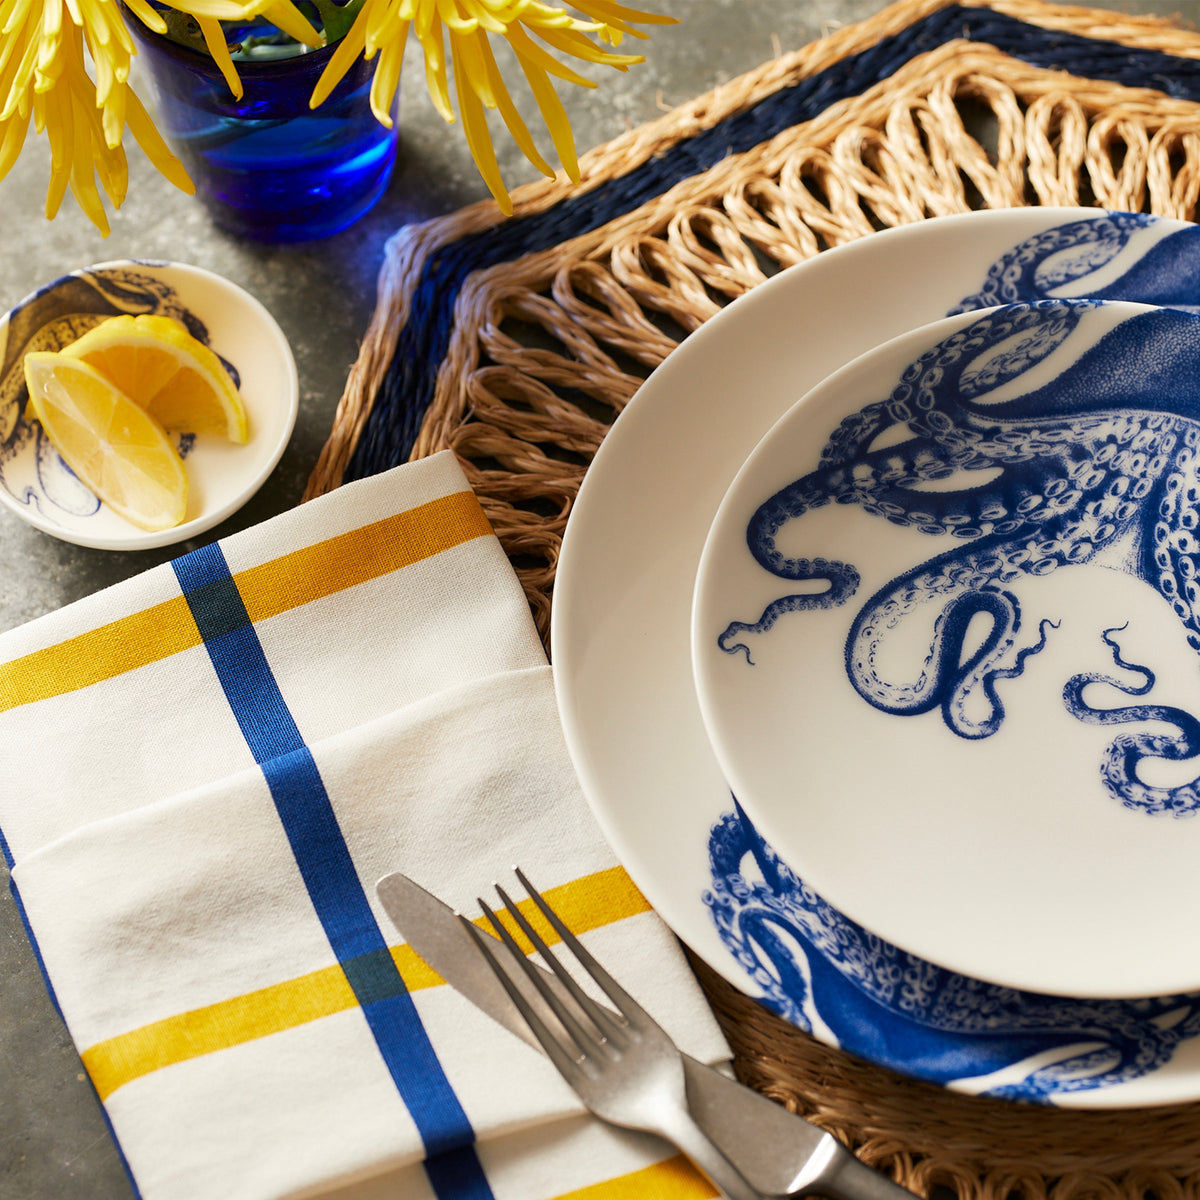 A Lucy Blue Coupe Dinner Plate by Caskata Artisanal Home with a yellow napkin, adding a touch of deepwater whimsy.